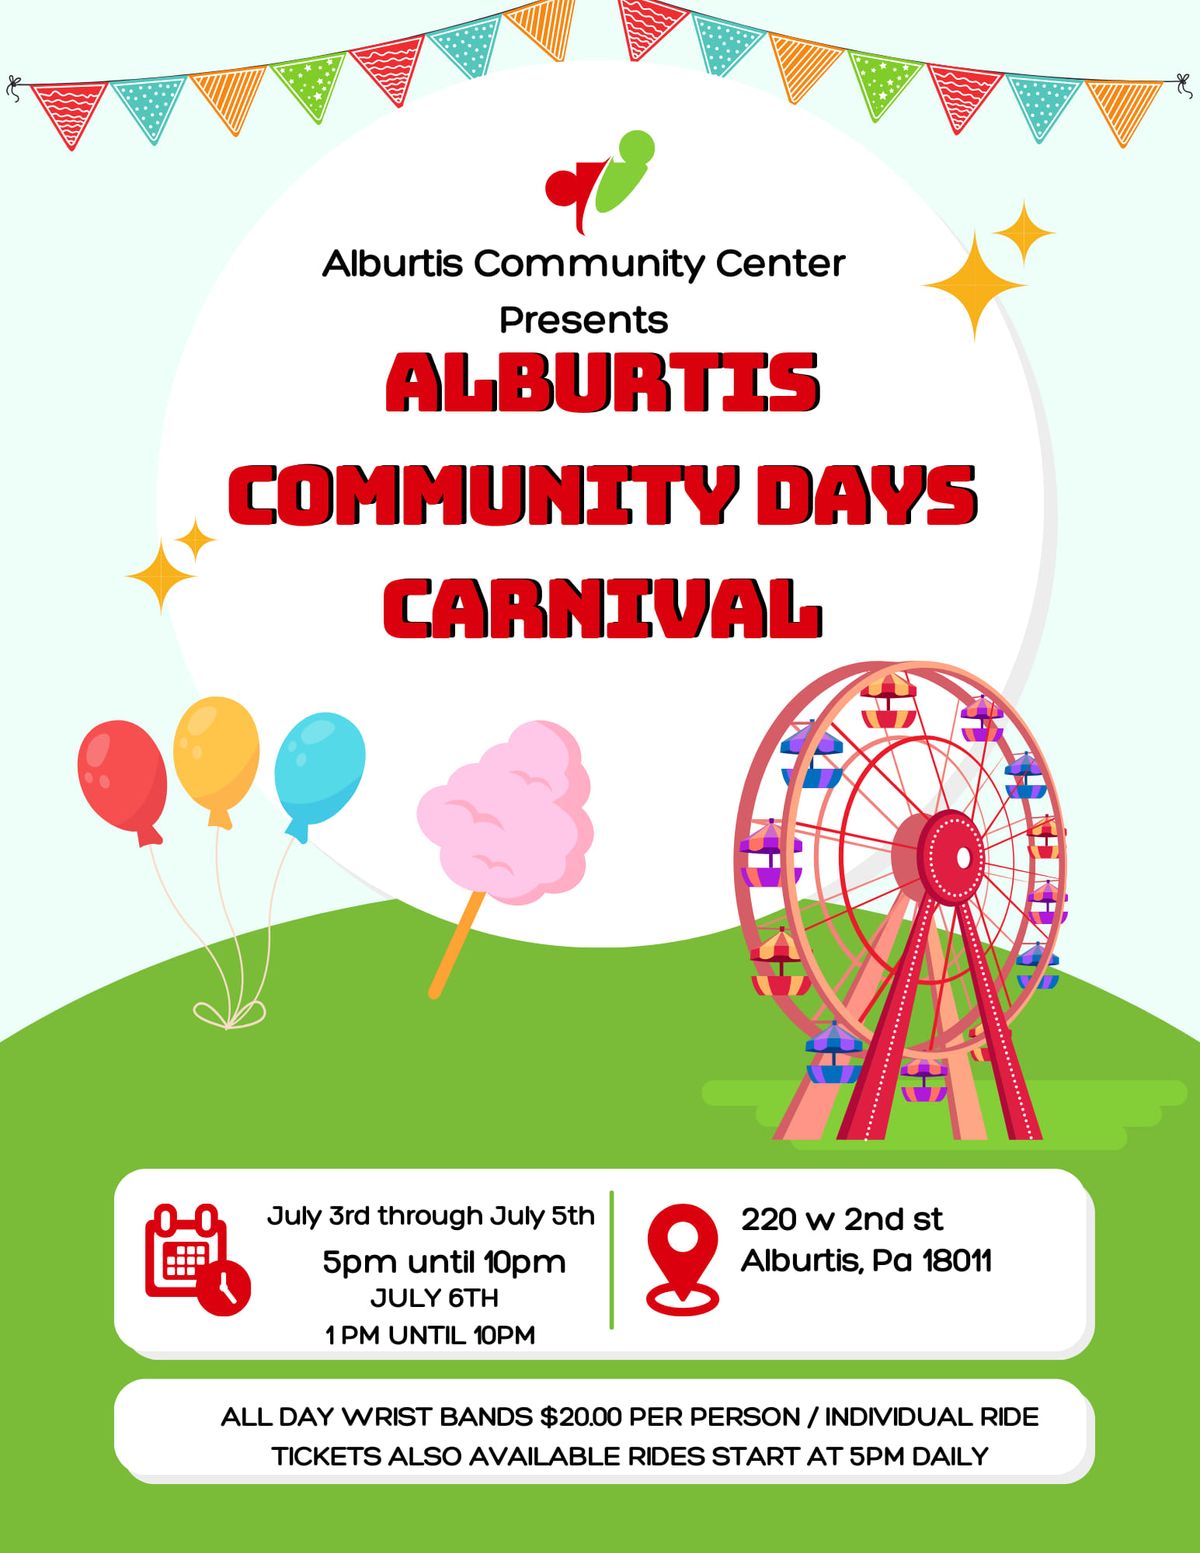 Alburtis Community Days Carnival  July 3rd, 4th 5th and 6th